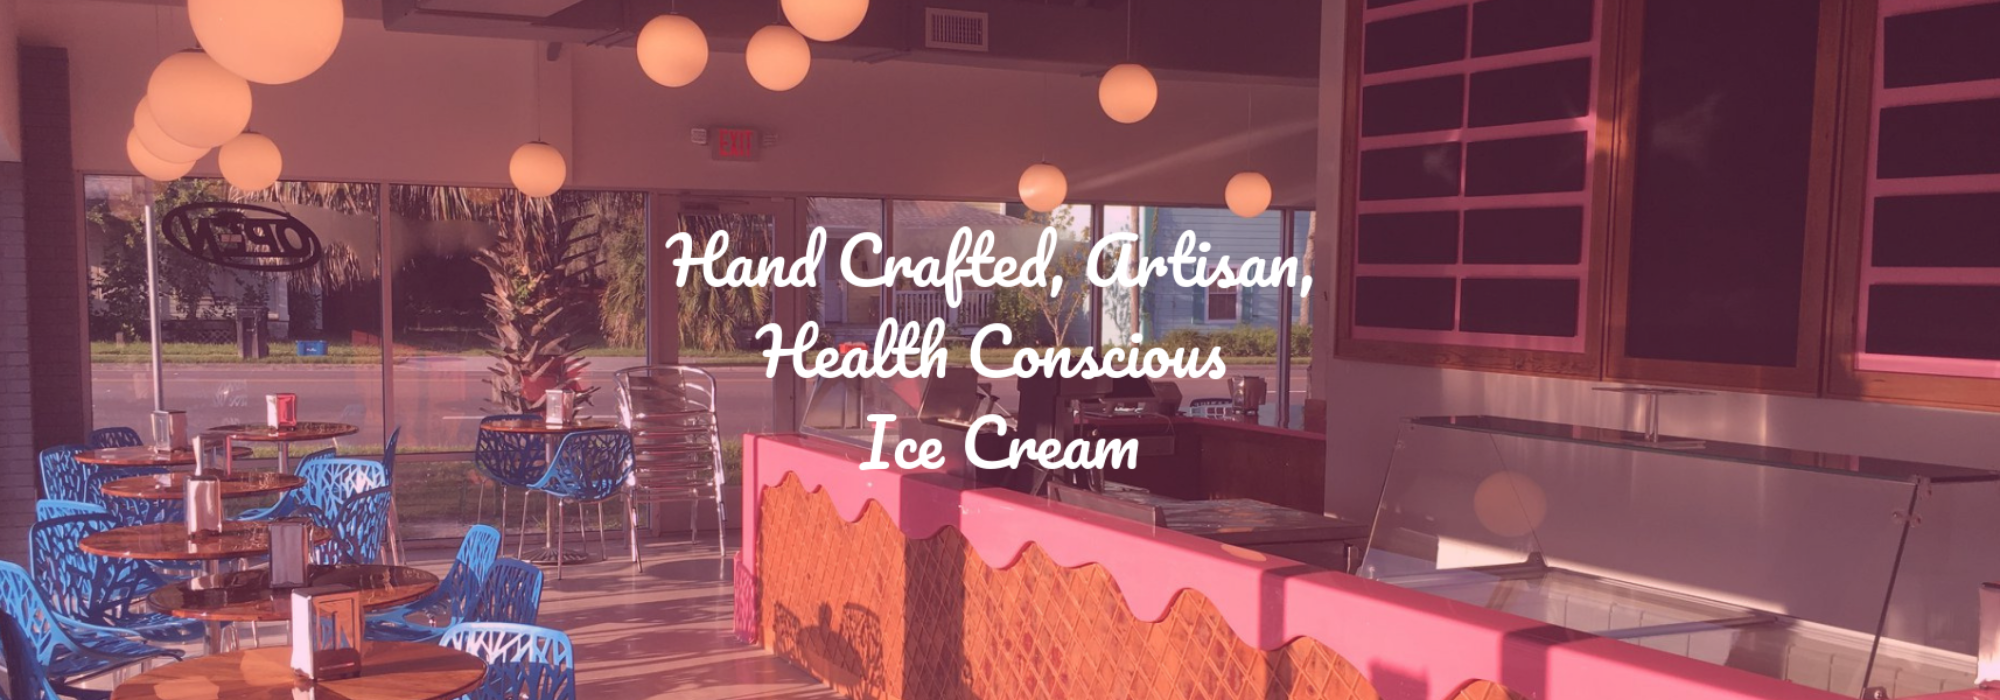 https://hoggetownecreamery.com/wp-content/uploads/2019/08/Hand-Crafted-Artisan-Health-Conscious-Ice-Cream-2000x700.png